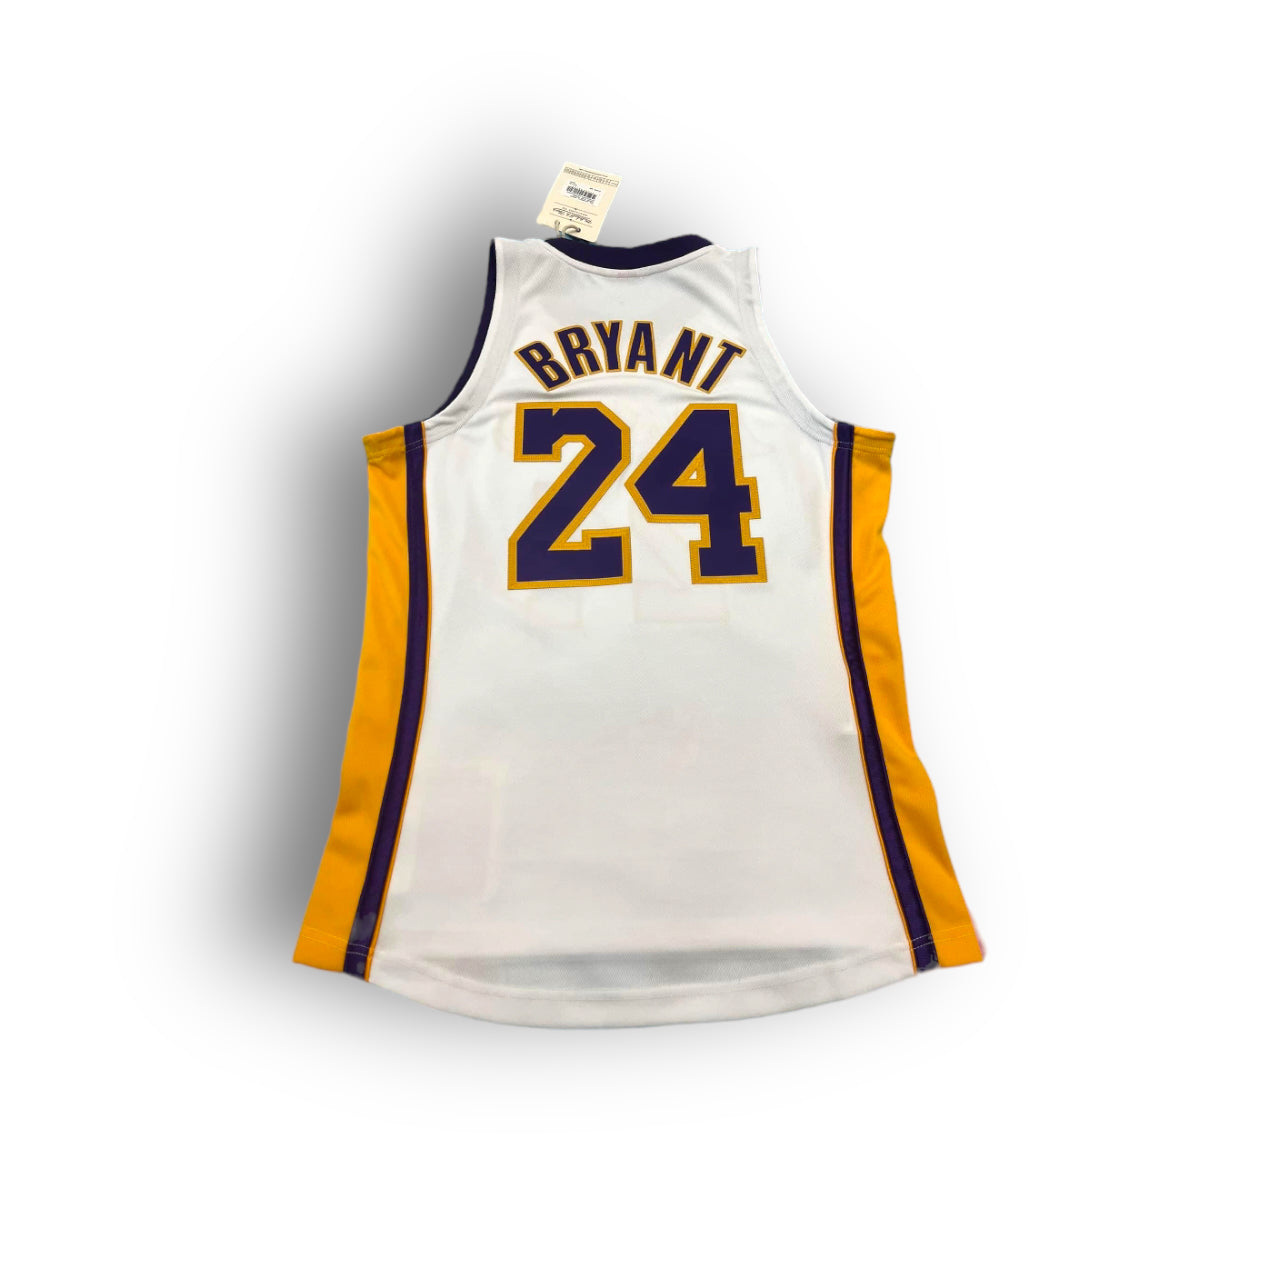 Mitchell and Ness Kobe Bryant Los Angeles Lakers 2009-2010 NBA Finals Alternate Authentic Jersey - White #24 - Hoop Jersey Store